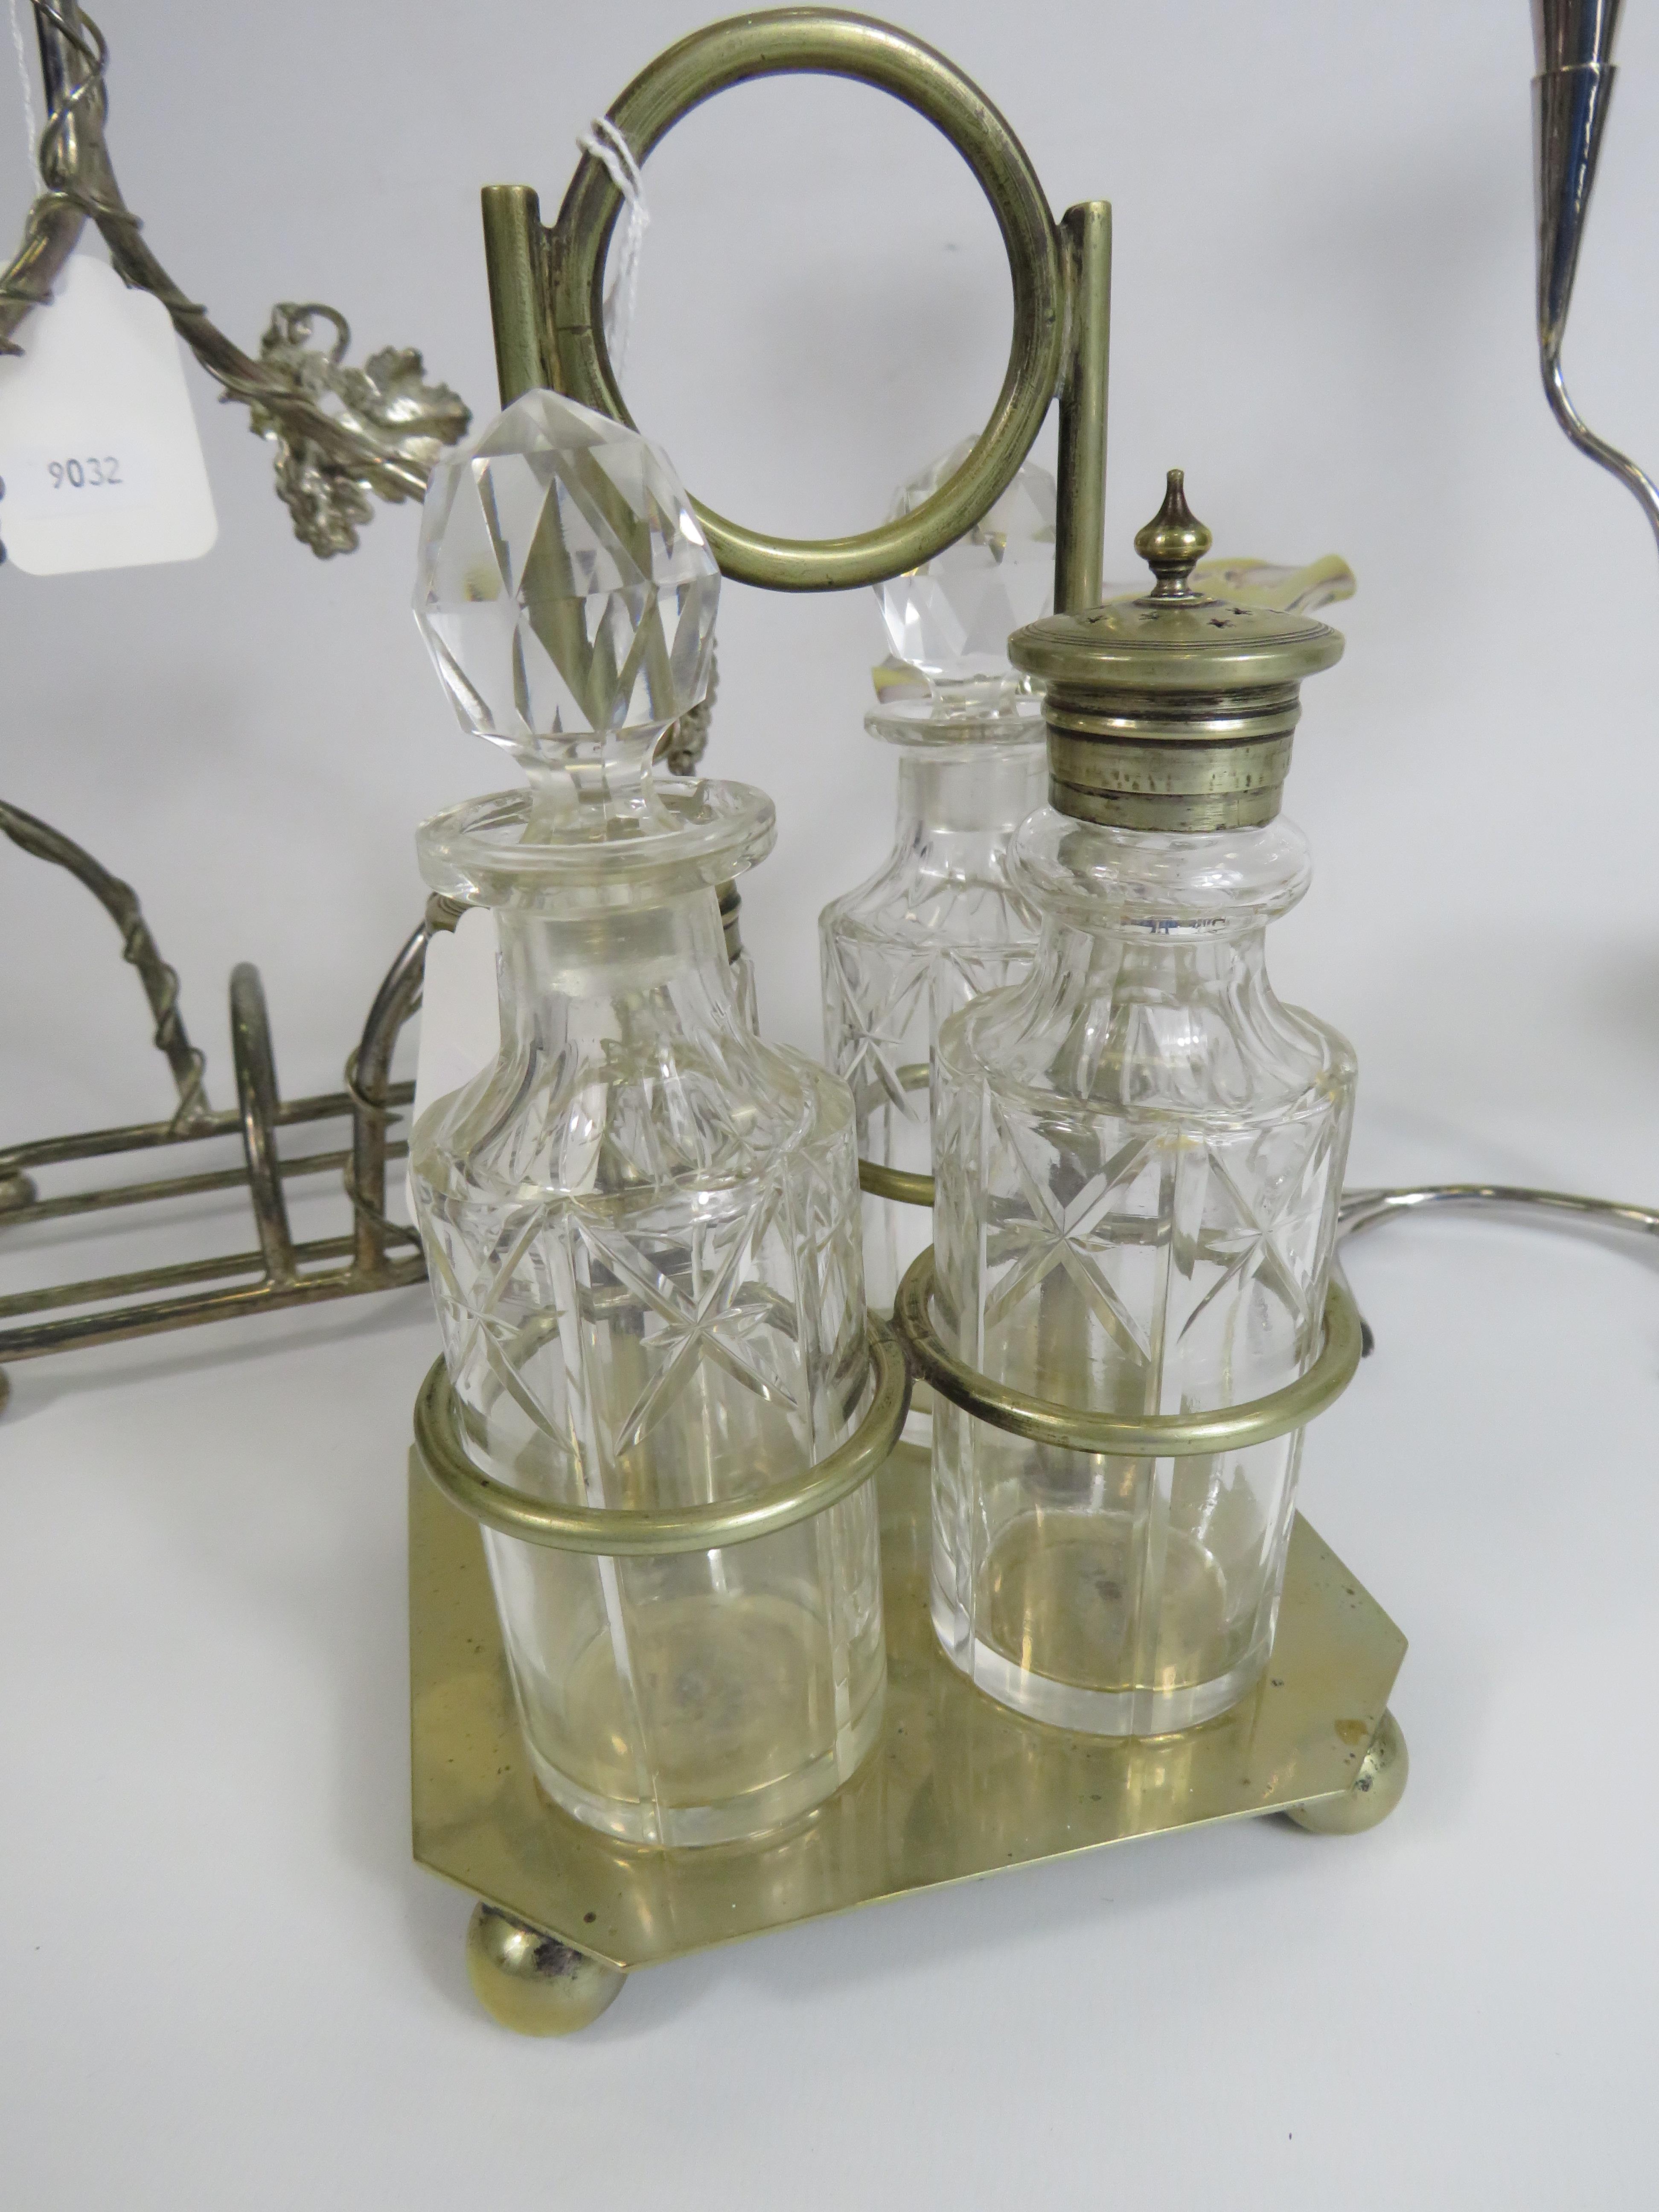 Silver plated cruet set, Epergne vase and a white metal bottle holder. - Image 2 of 4